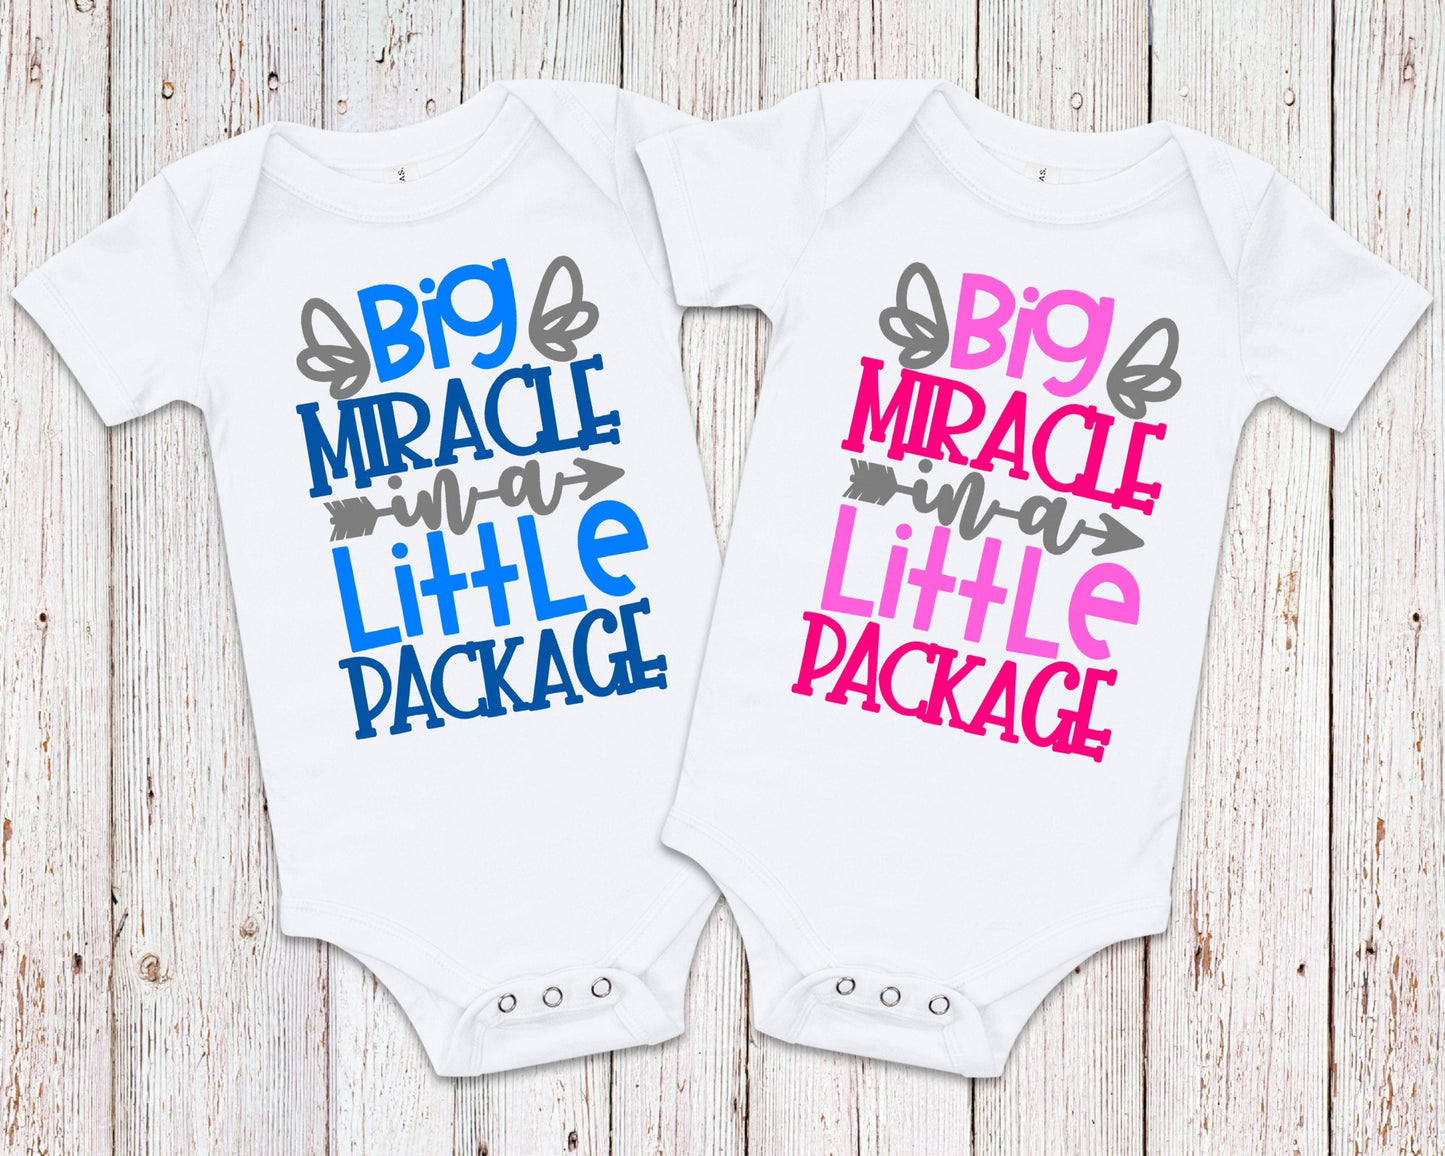 Big Miracle in a Little Package T-Shirts or Bodysuits for Twins - Identical Twins - IVF Miracle Babies - IUI Miracle Babies - NICU Warriors